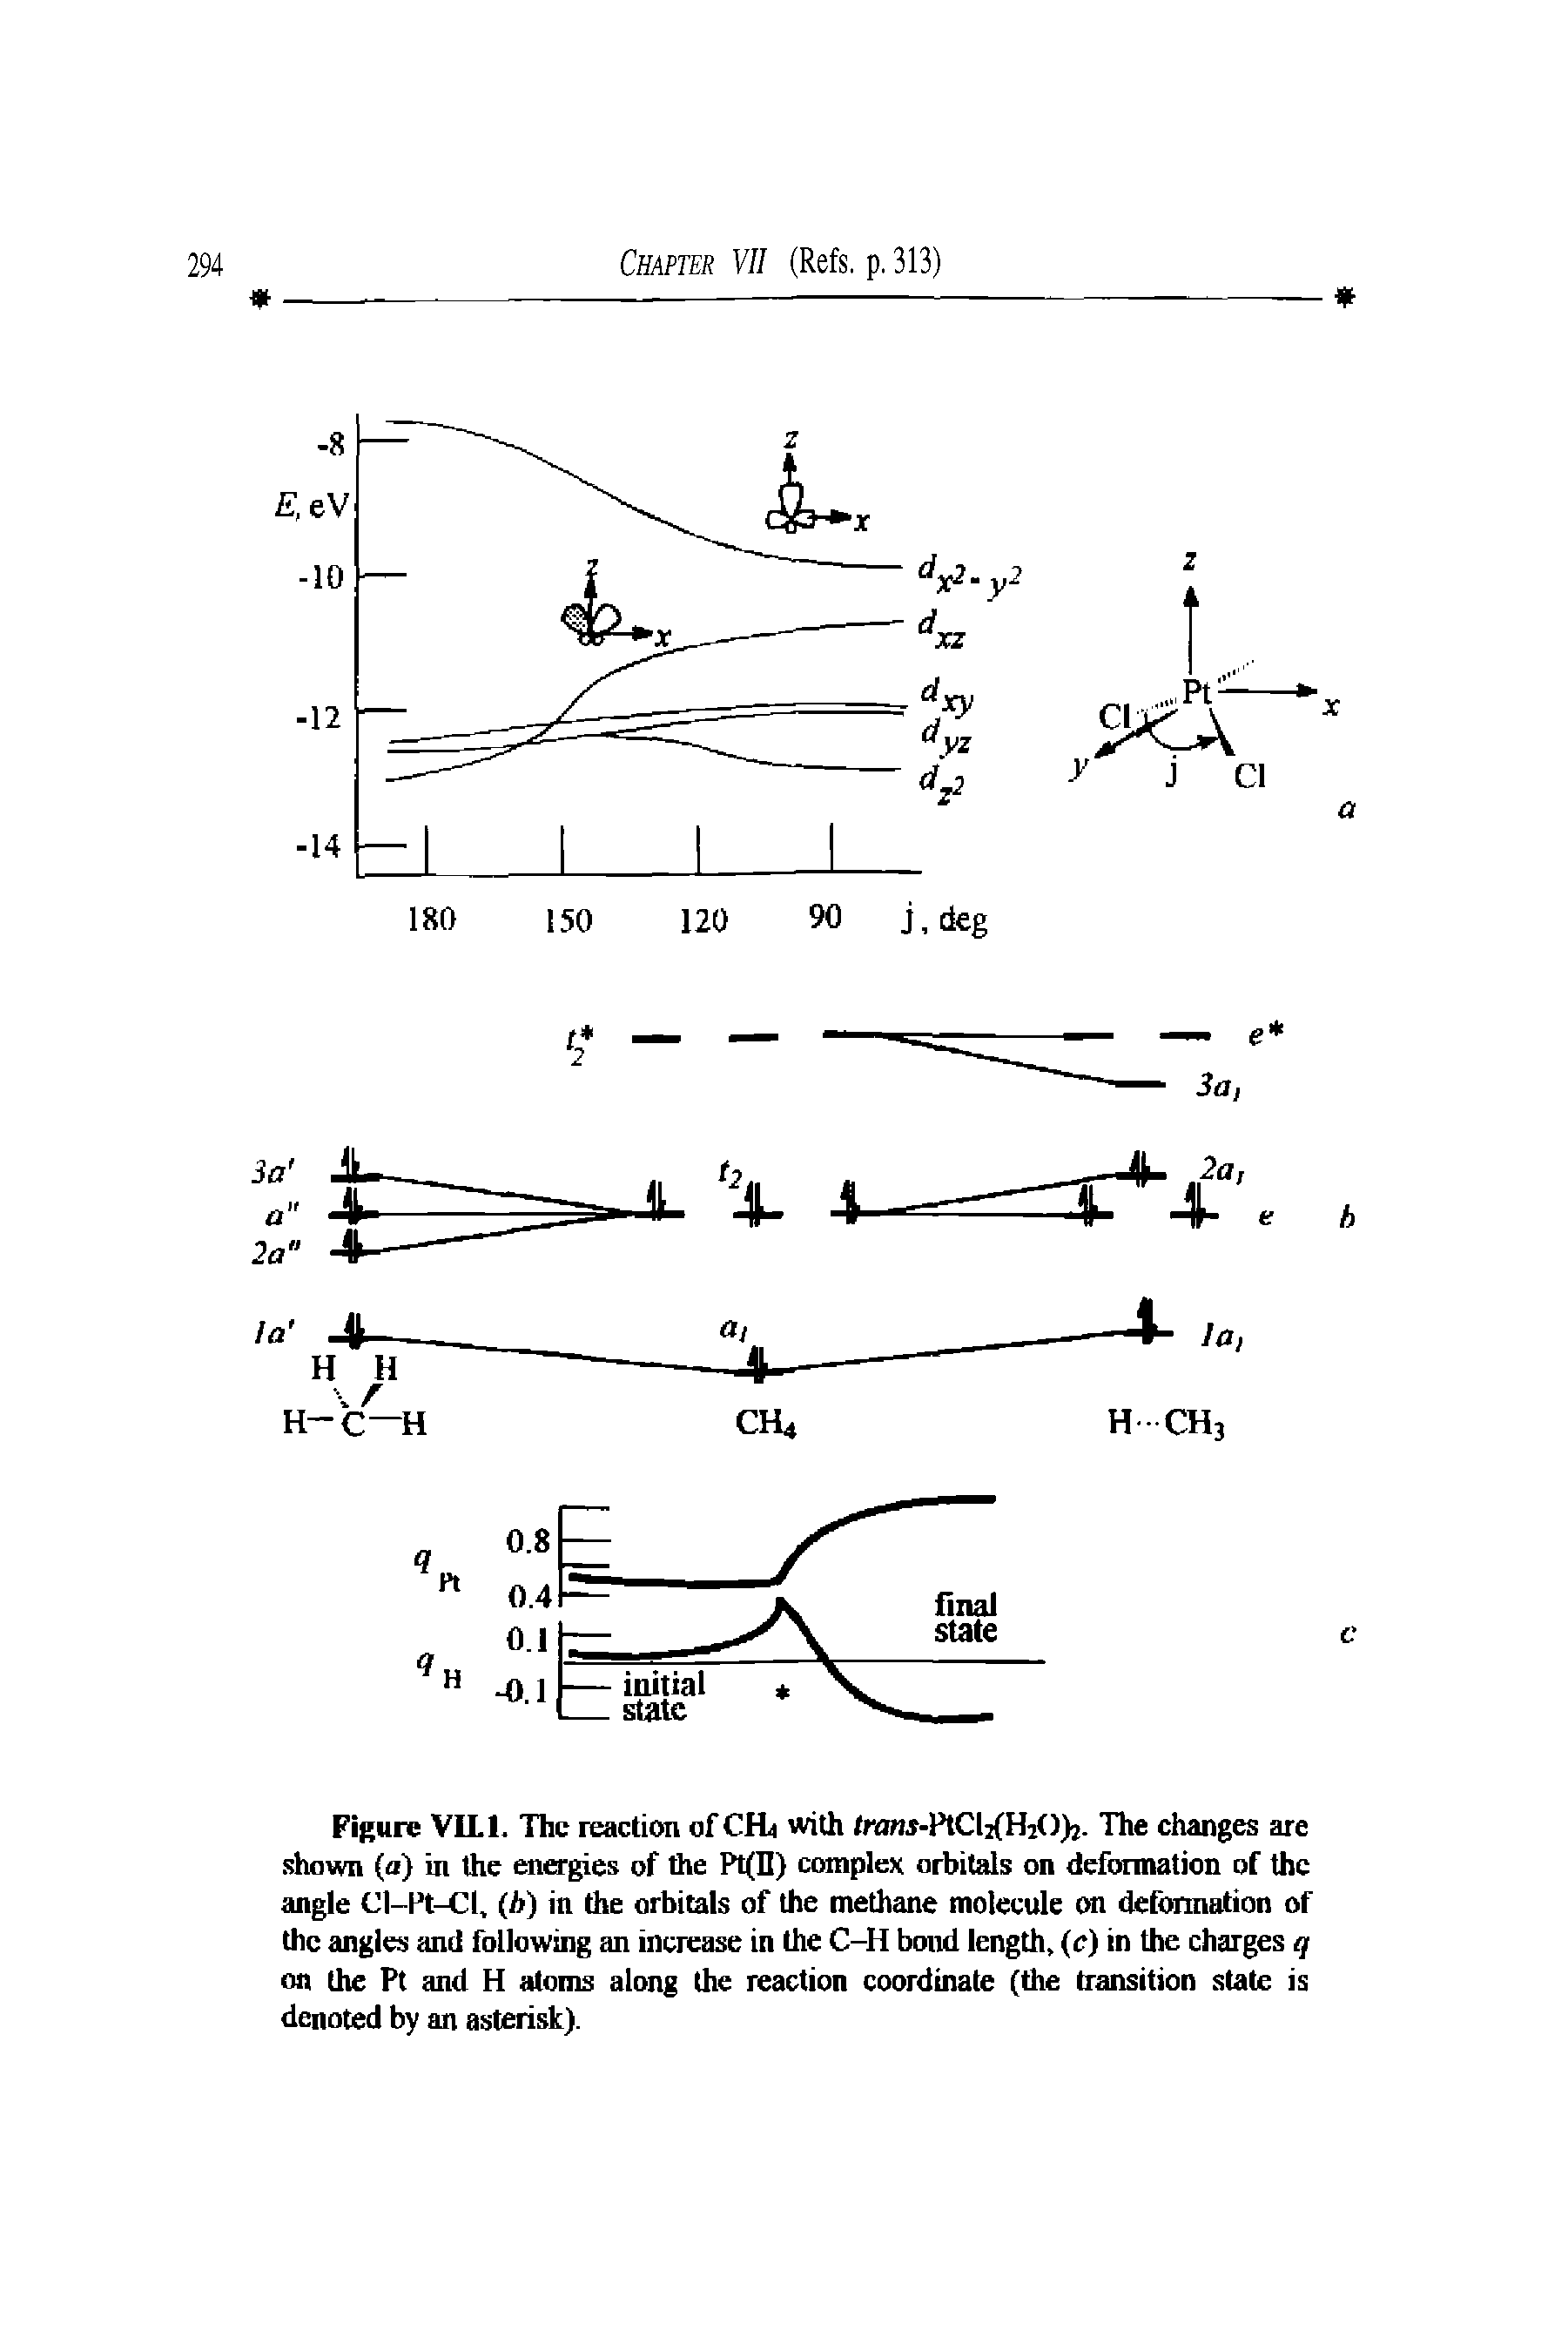 Figure VILl. The reaction ofCHi with tniMj-FtCljfHiO) . The changes are shown (a) in the energies of the Ptfll) complex orbitals on deformation of the angle Cl-Pt-Cl. (A) in the orbitals of the methane molecule on deformation of the angles and following an increase in the C-H bond length, (c) in the charges q on the Pt and H atoms along the reaction coordinate (the transition slate is denoted by an asterisk).